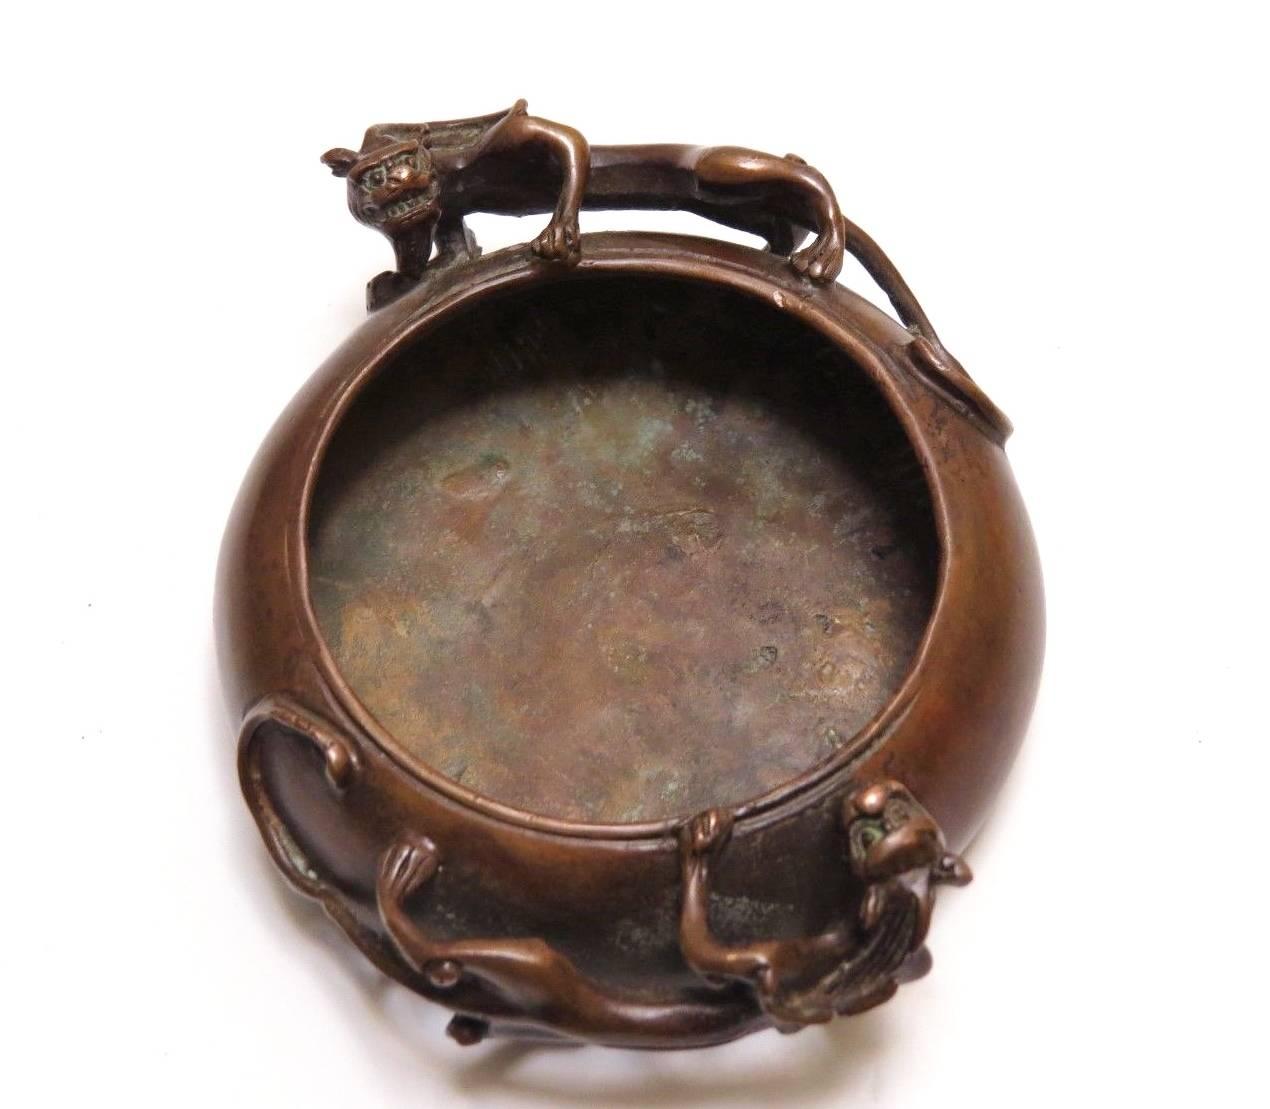 Stunning bronze bowl is both an incense burner and a washer used to hold water for calligraphy painting. 

The pair of dragon like animals, called 